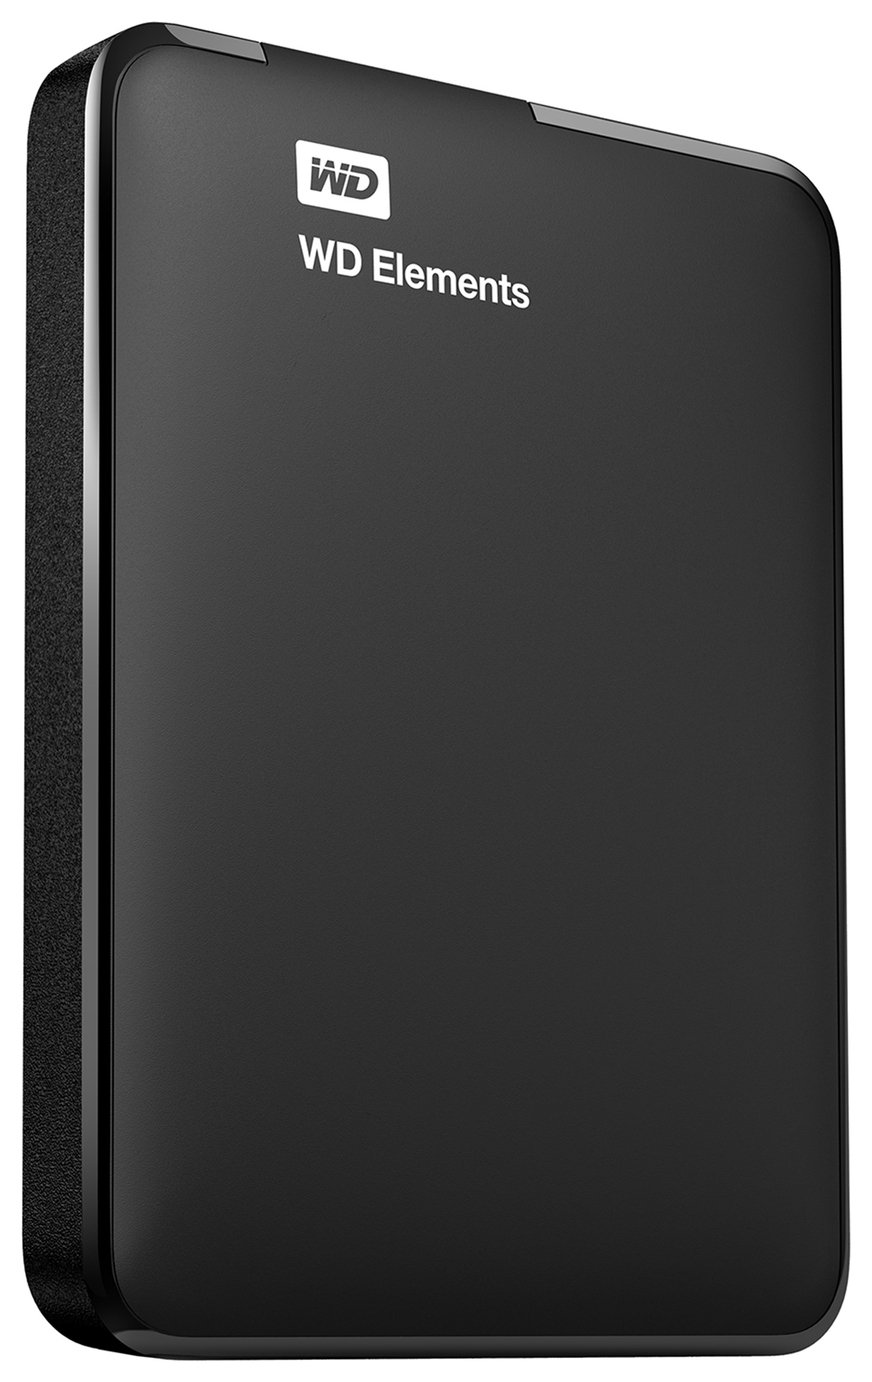 WD Elements 2TB USB 3.0 Portable Hard Drive Review